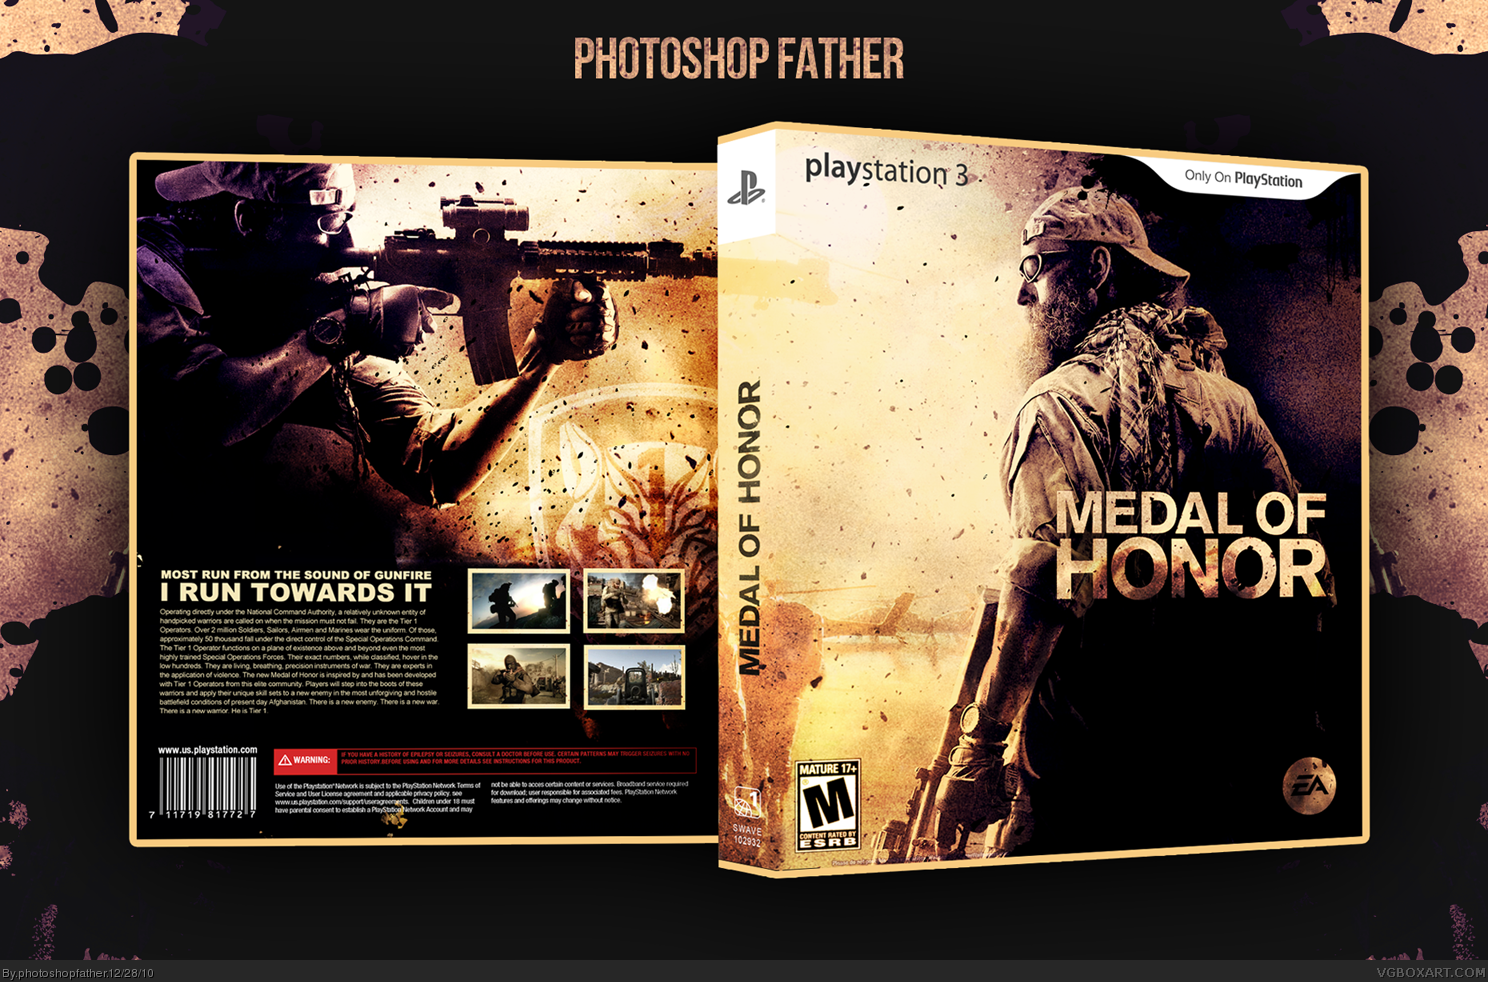 Medal of Honor ps3 обложка. Medal of Honor Limited Edition ps3. Медаль оф хонор на пс3. Медал оф хонор 2010 обложка. Medal of honor 3